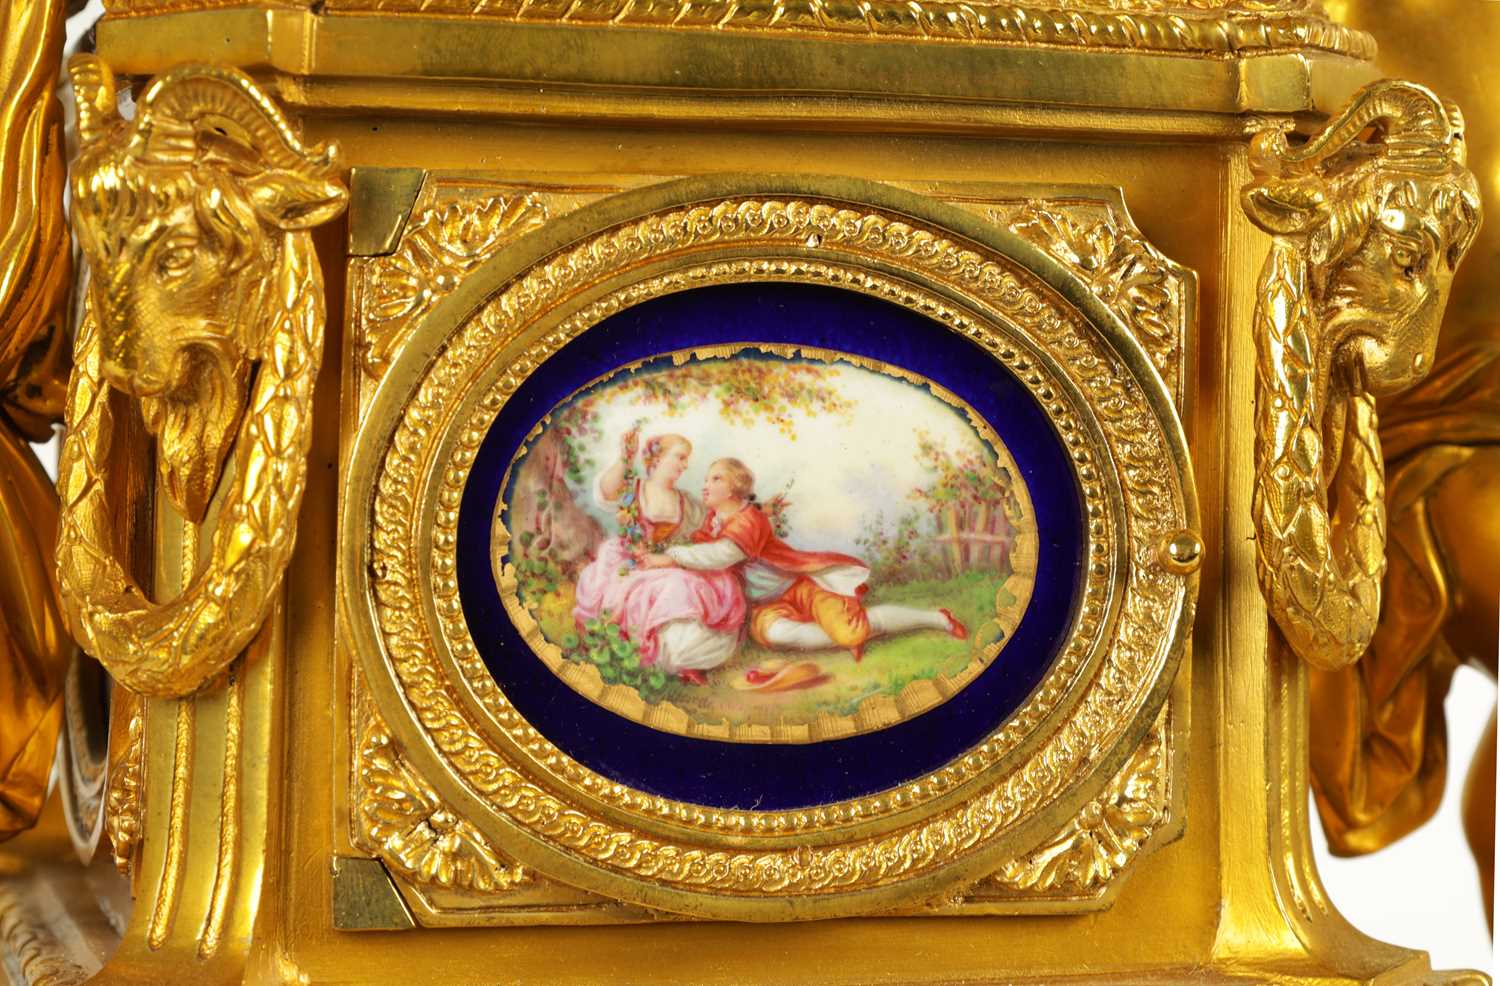 A FINE MID 19TH FRENCH ORMOLU AND 'SEVRES' PORCELAIN MOUNTED REVOLVING URN CLOCK - Image 3 of 13